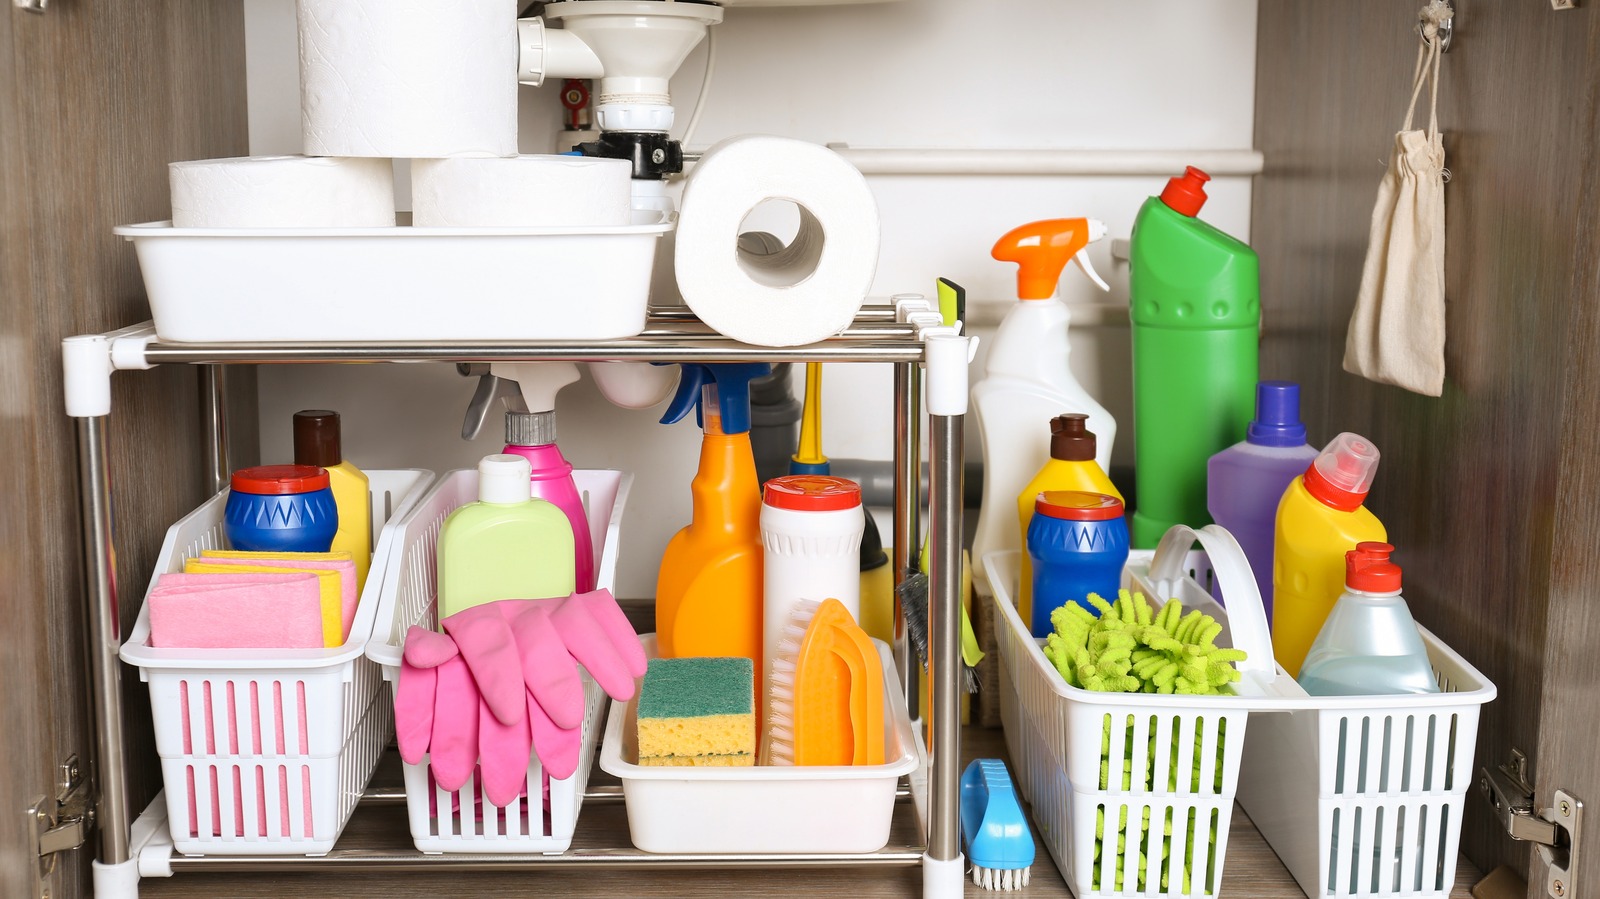 https://www.housedigest.com/img/gallery/unbeatable-under-sink-organizers-to-keep-your-space-tidy-for-good/l-intro-1695148557.jpg